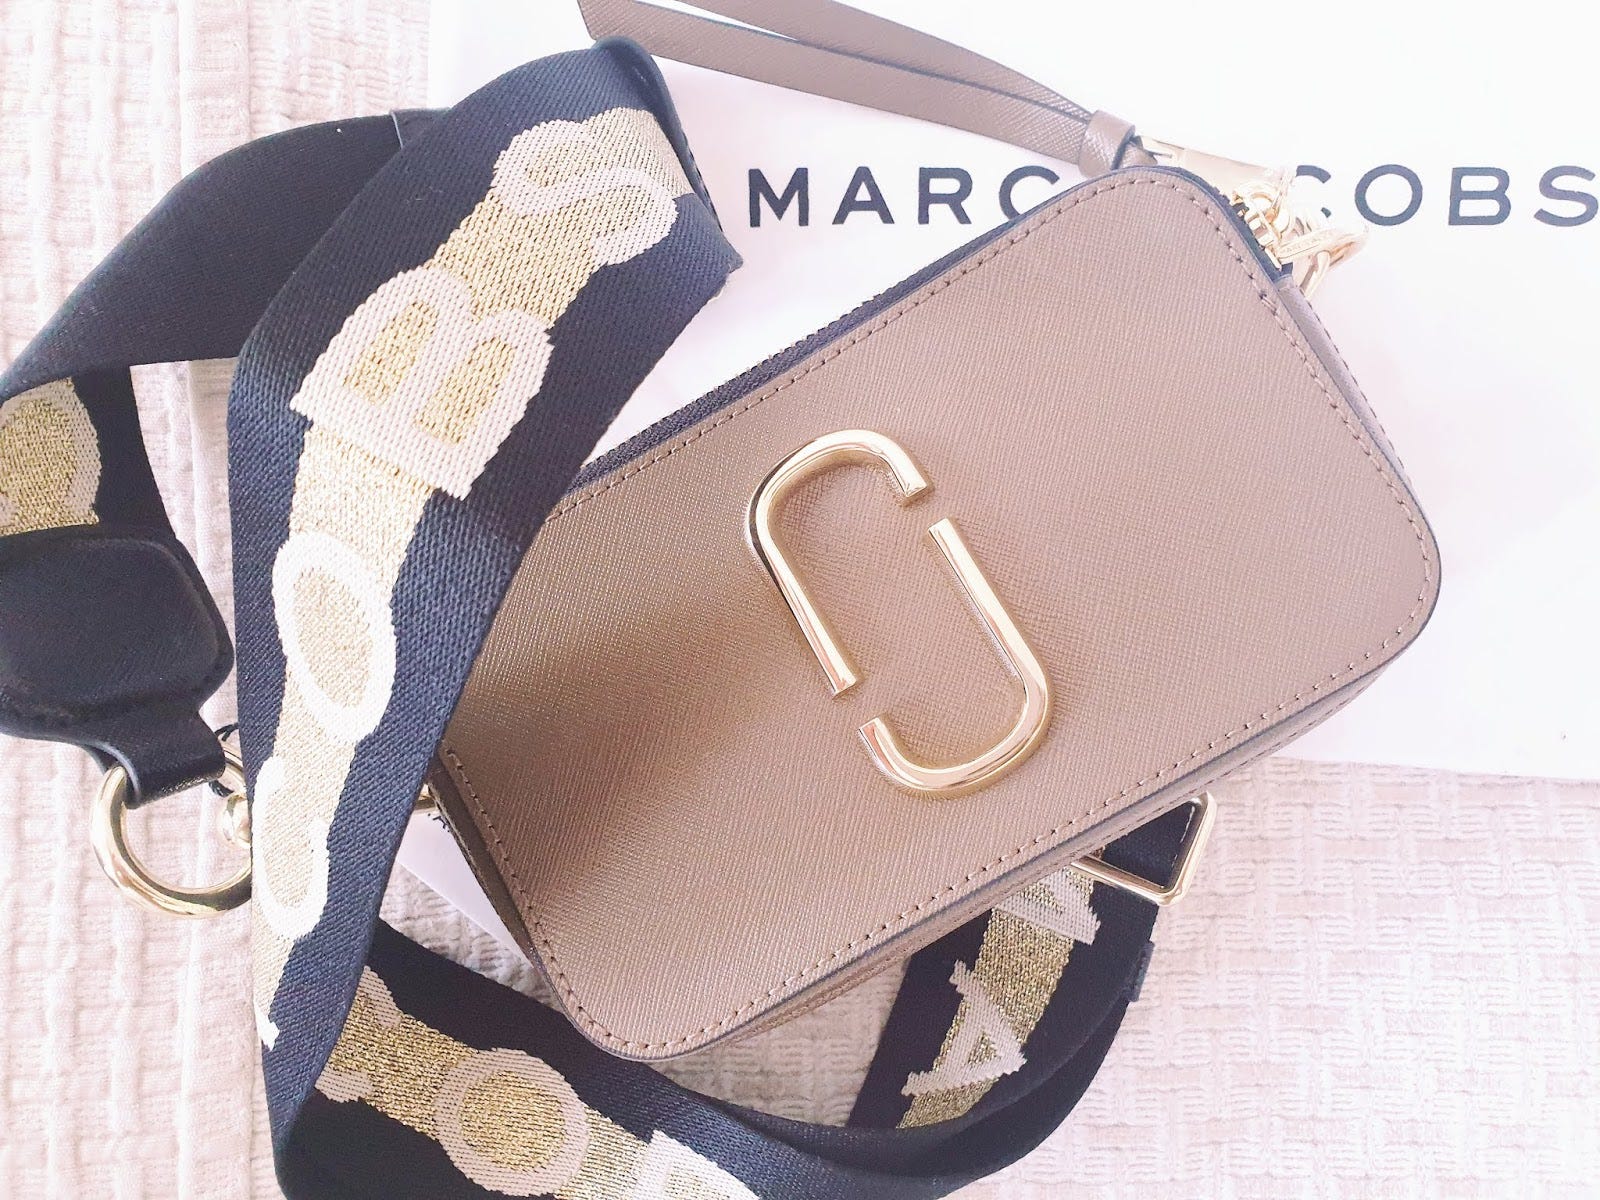 MARC JACOBS SNAPSHOT CAMERA BAG IN DEPTH REVIEW